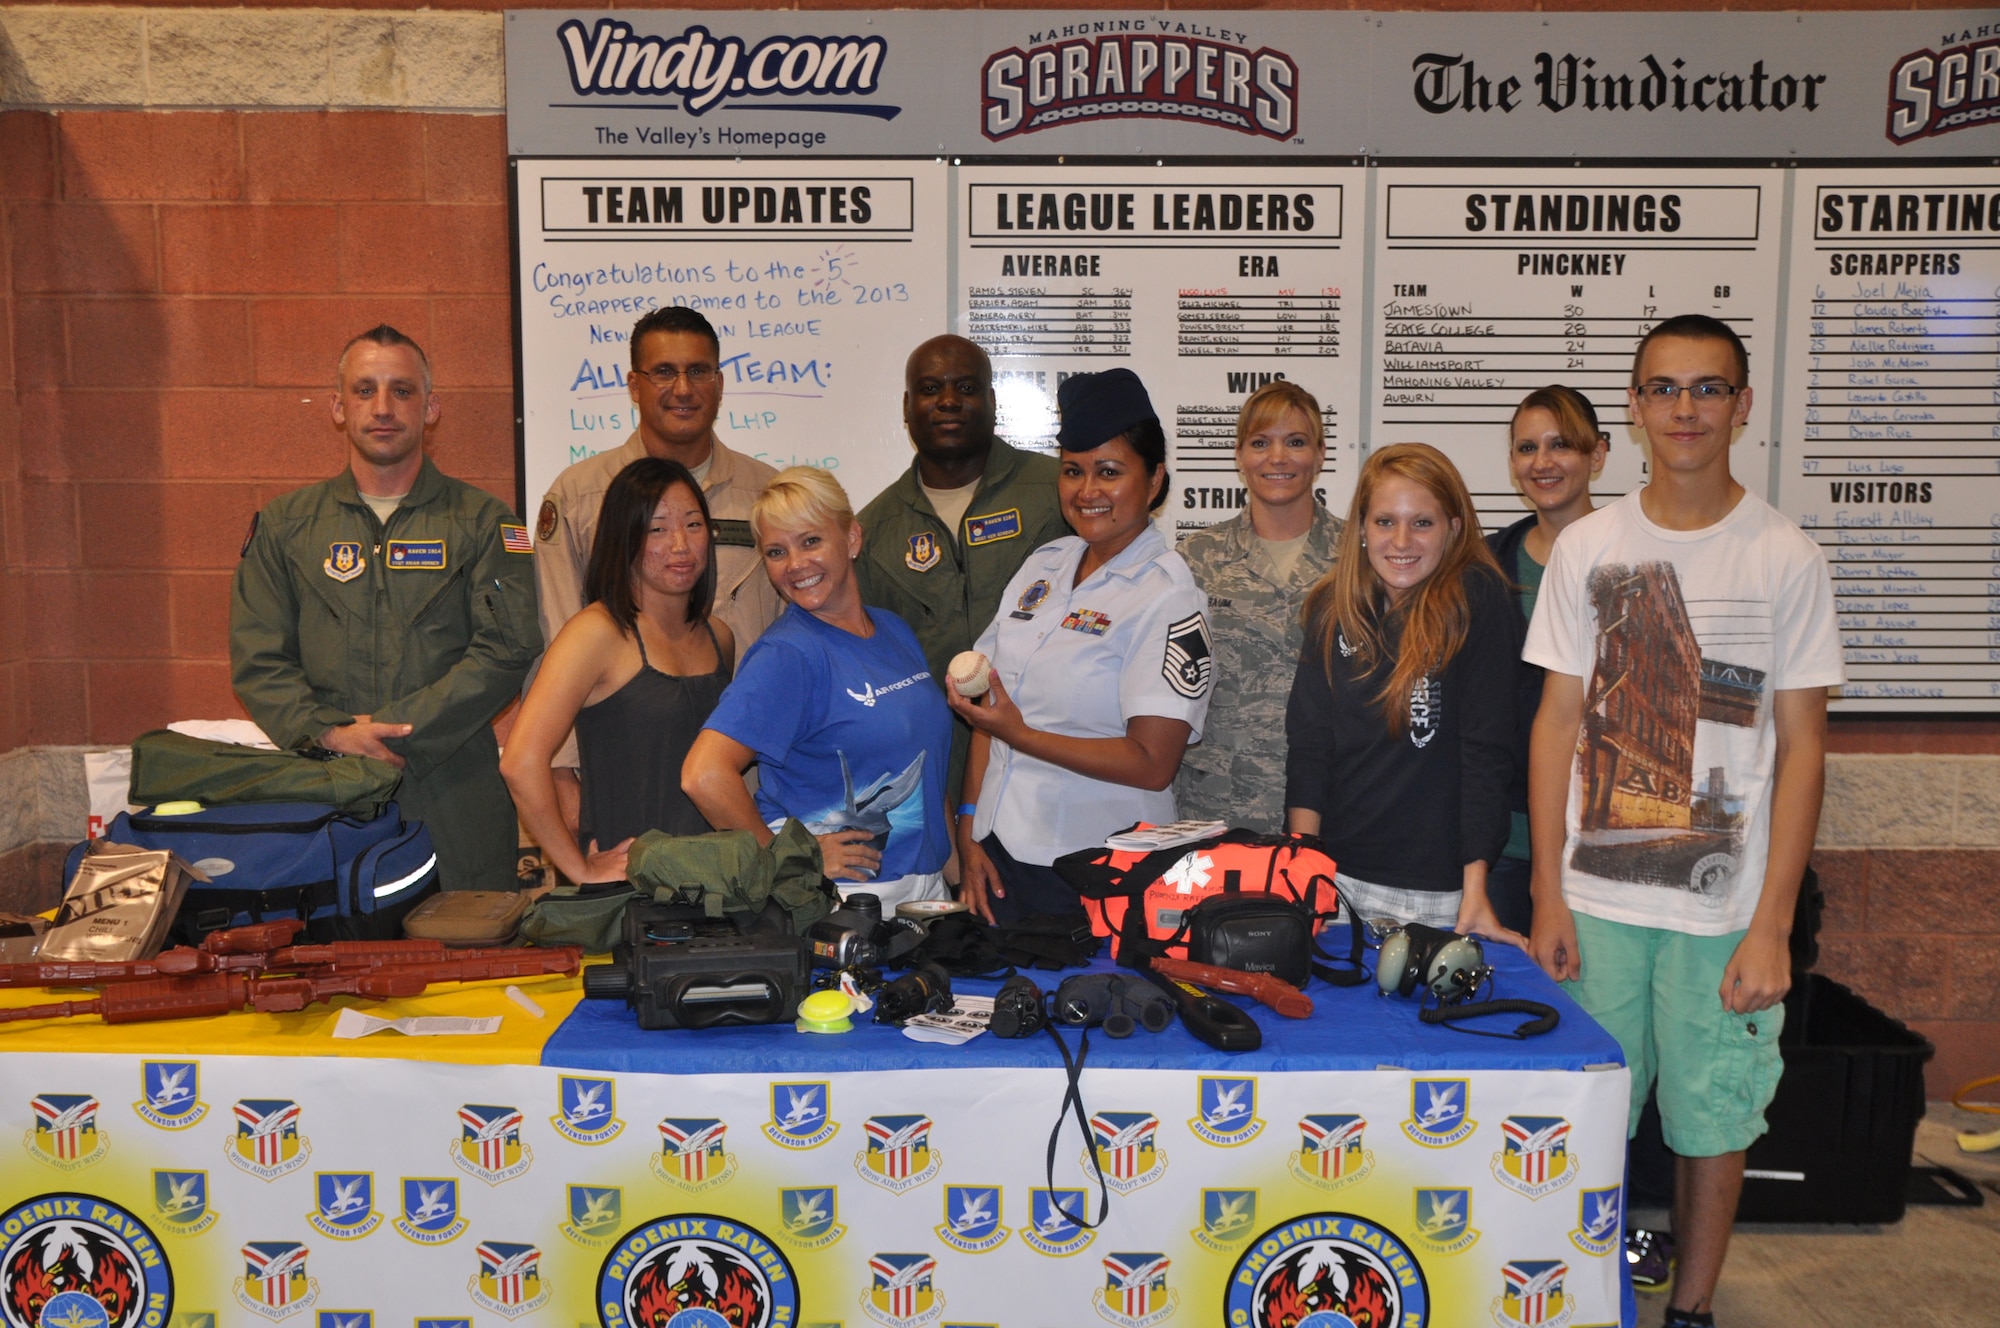 A group representing Youngstown Air Reserve Station (YARS), Ohio stands behind a concourse table display during a minor league baseball game between the Cleveland Indians Class A affiliate Mahoning Valley Scrappers and the Lowell Spinners at Eastwood Field here, August 7, 2013. Nearly 200 Citizen Airmen along with their families, friends and co-workers were in attendance and individuals from the 910th Airlift Wing, based at nearby YARS, were involved in many game night activities. U.S. Air Force photo by Master Sgt. Bob Barko Jr.